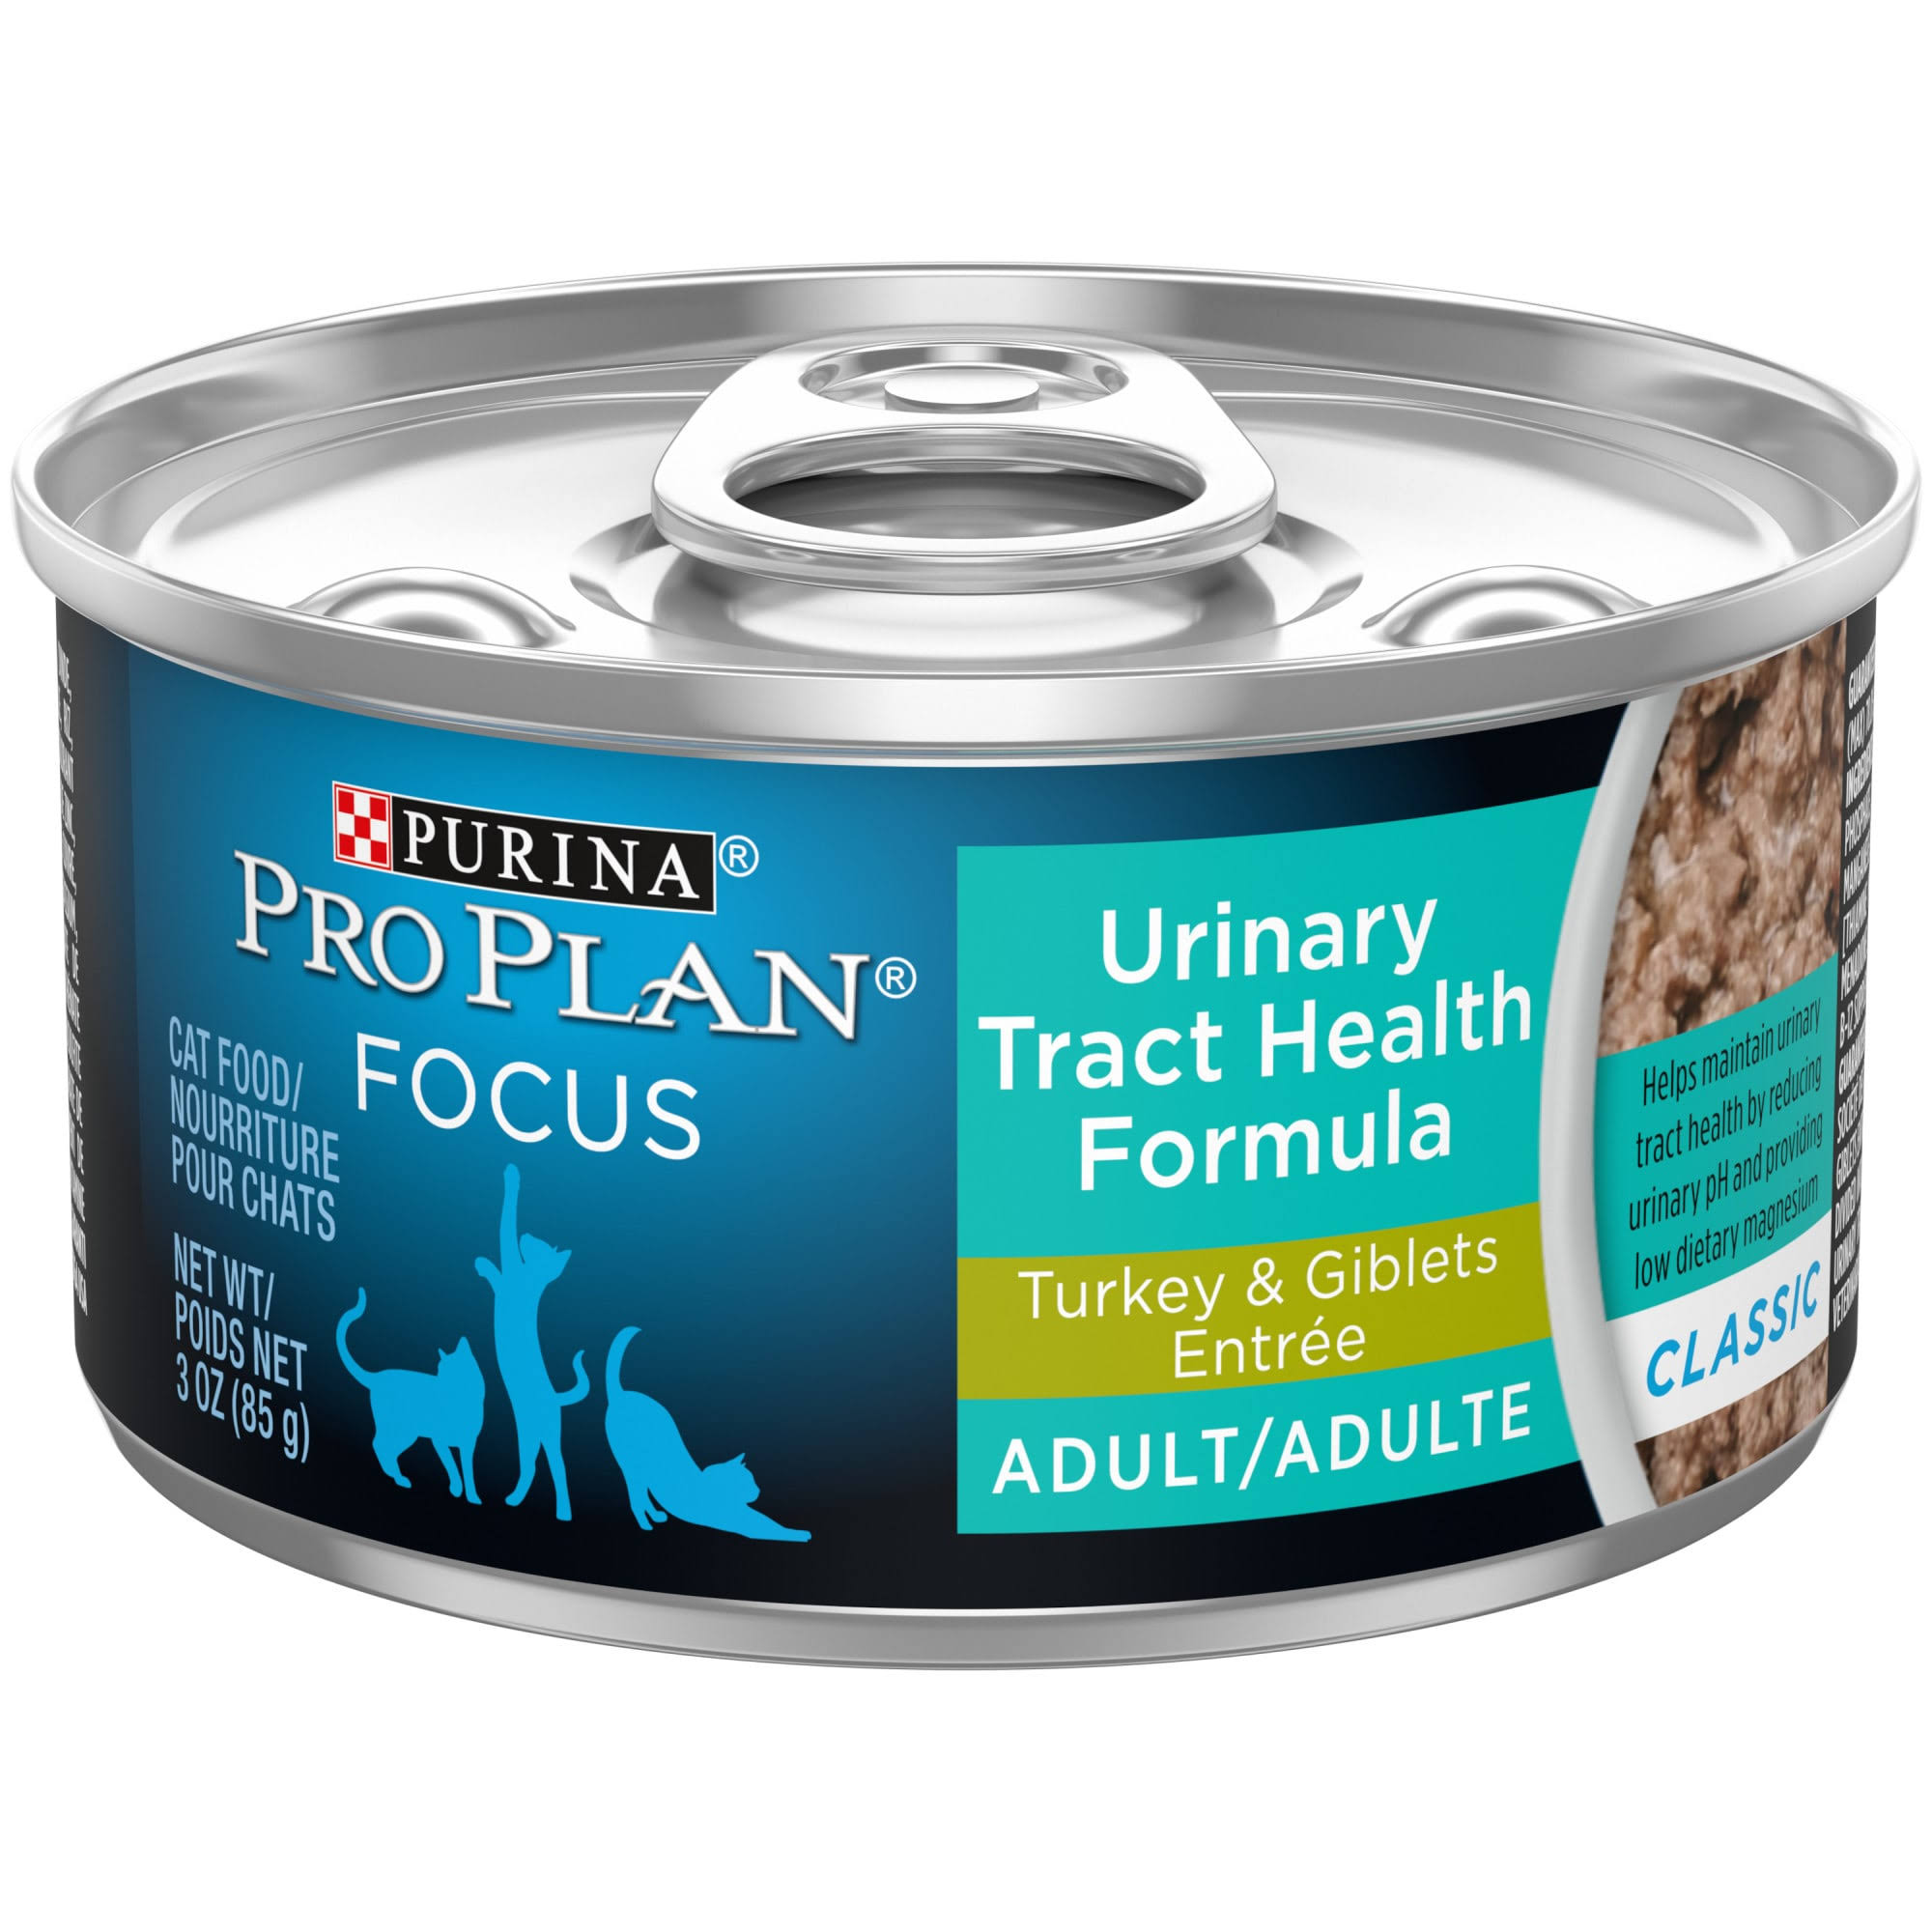 Purina Pro Plan Focus Adult Urinary Tract Health Formula Cat Food - Turkey and Giblets Entree, 24pk, 3oz